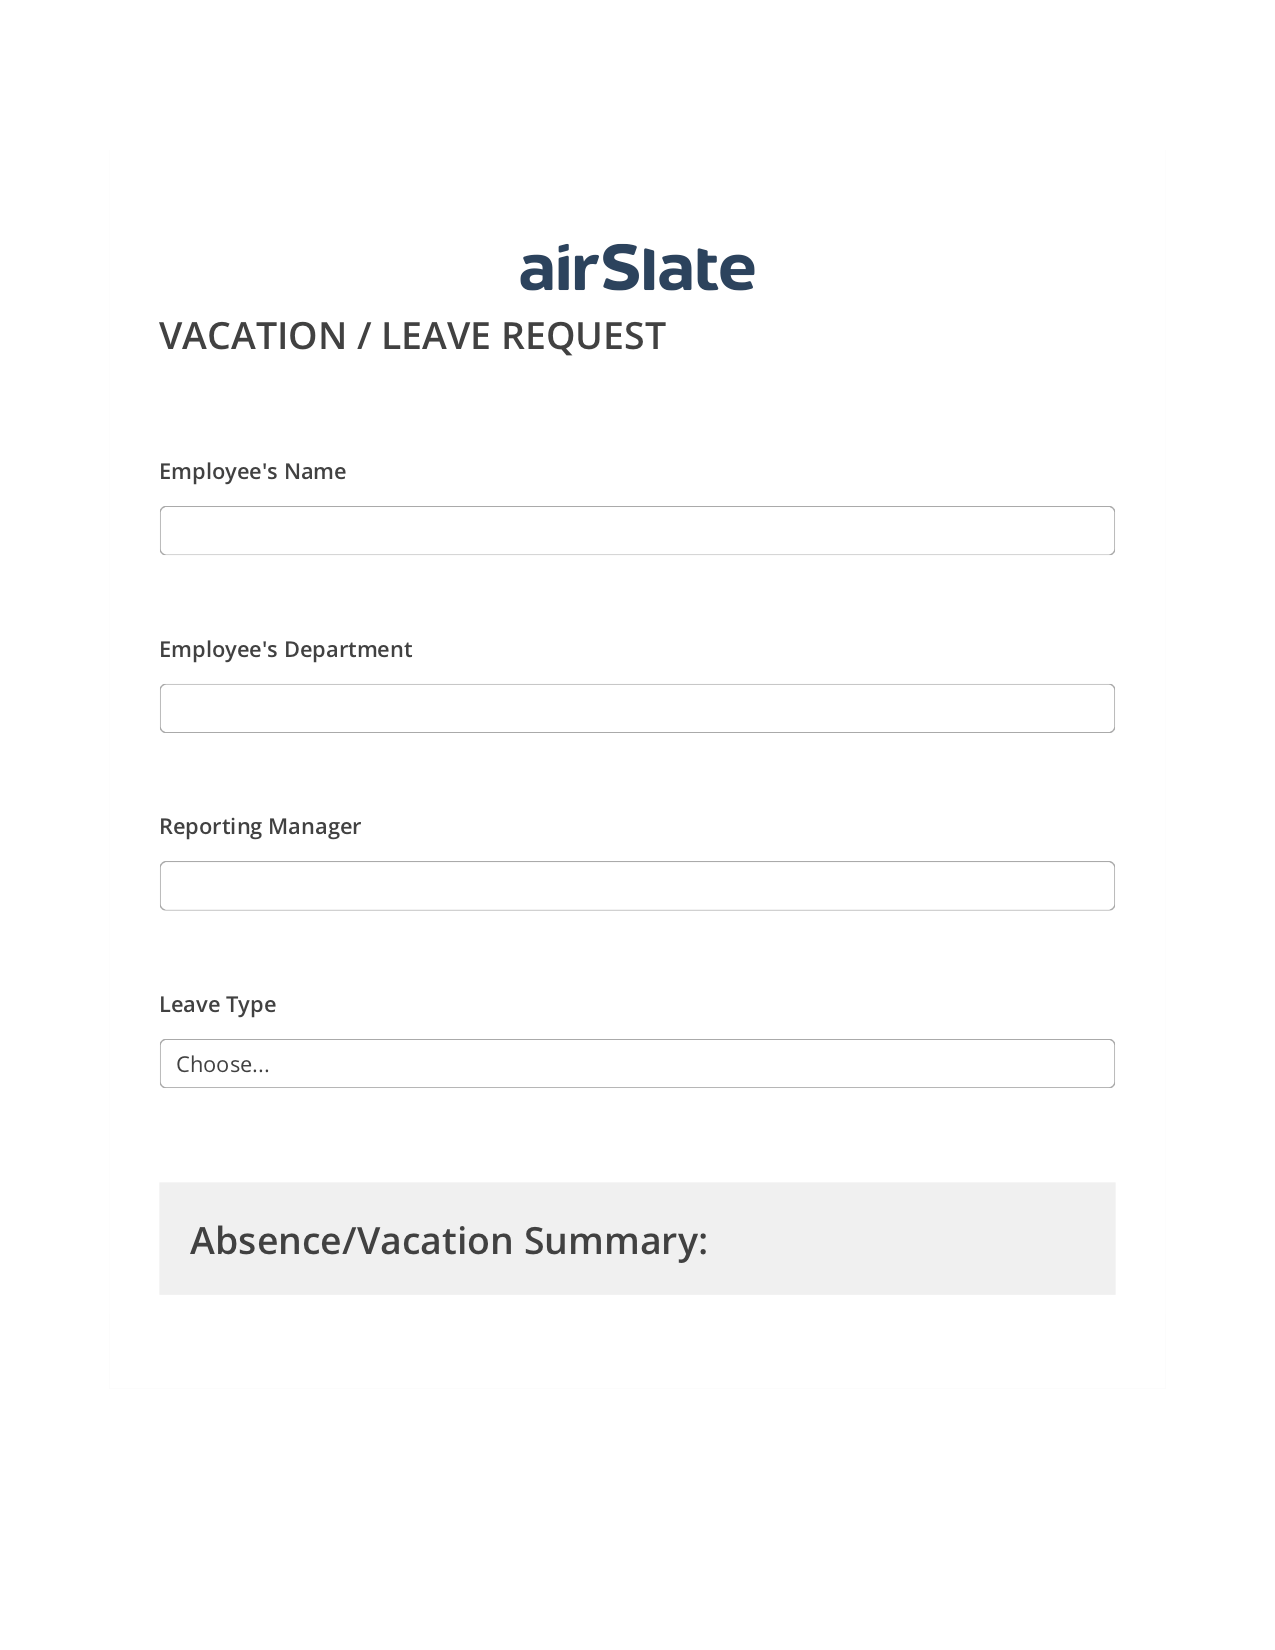 Vacation/Leave Request Workflow System Bot - Slack Two-Way Binding Bot, Unassign Role Bot, Archive to Box Bot